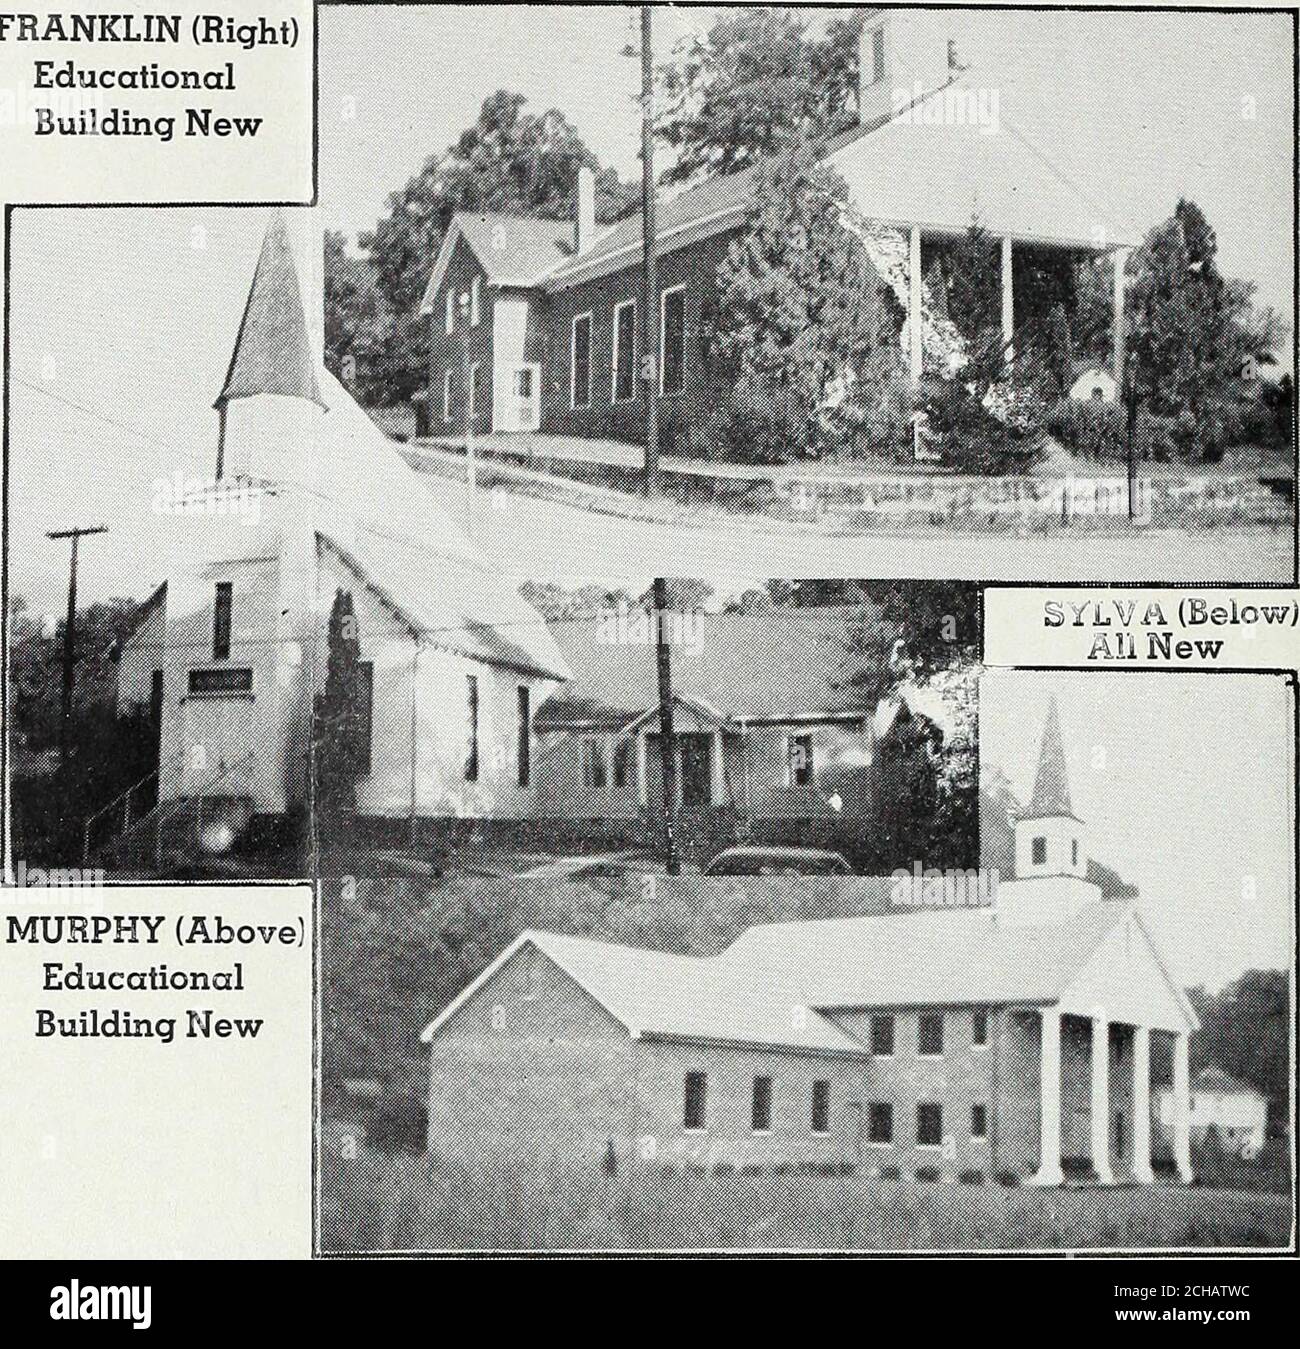 . Our mountain work [serial] . l every Sunday. The building hasbeen painted and interest revived underthe pastoral leadership of Mr. Somerville. During the long period between pas-torates the Sunday School had been dis-continued. At both Dillingham and IvyPark the Sunday Schools are giving oneSunday offering each month to The Moun-tain Orphanage. The total gifts to benevo-lences in 1945-1950 have about doubled inthe past three years. Brittains Cove The only help that Brittains Cove hasreceived was in the support of John Somer-ville, son of Rev. W. G. Somerville, whocame from Columbia Seminary Stock Photo